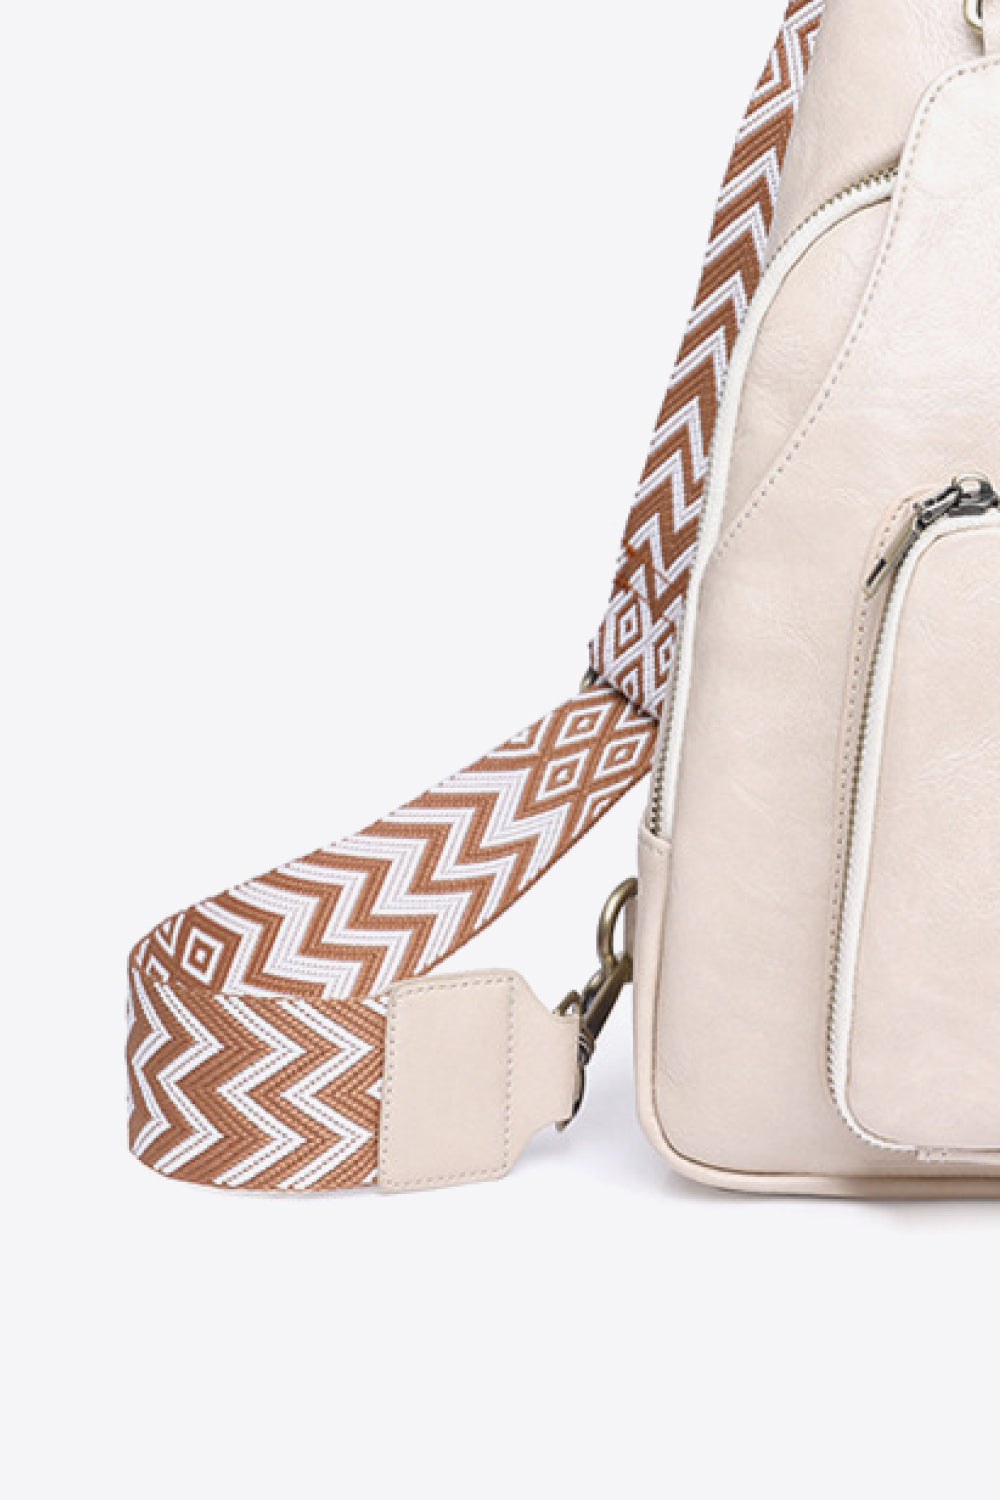 Take A Trip PU Leather Sling Bag - Cheeky Chic Boutique